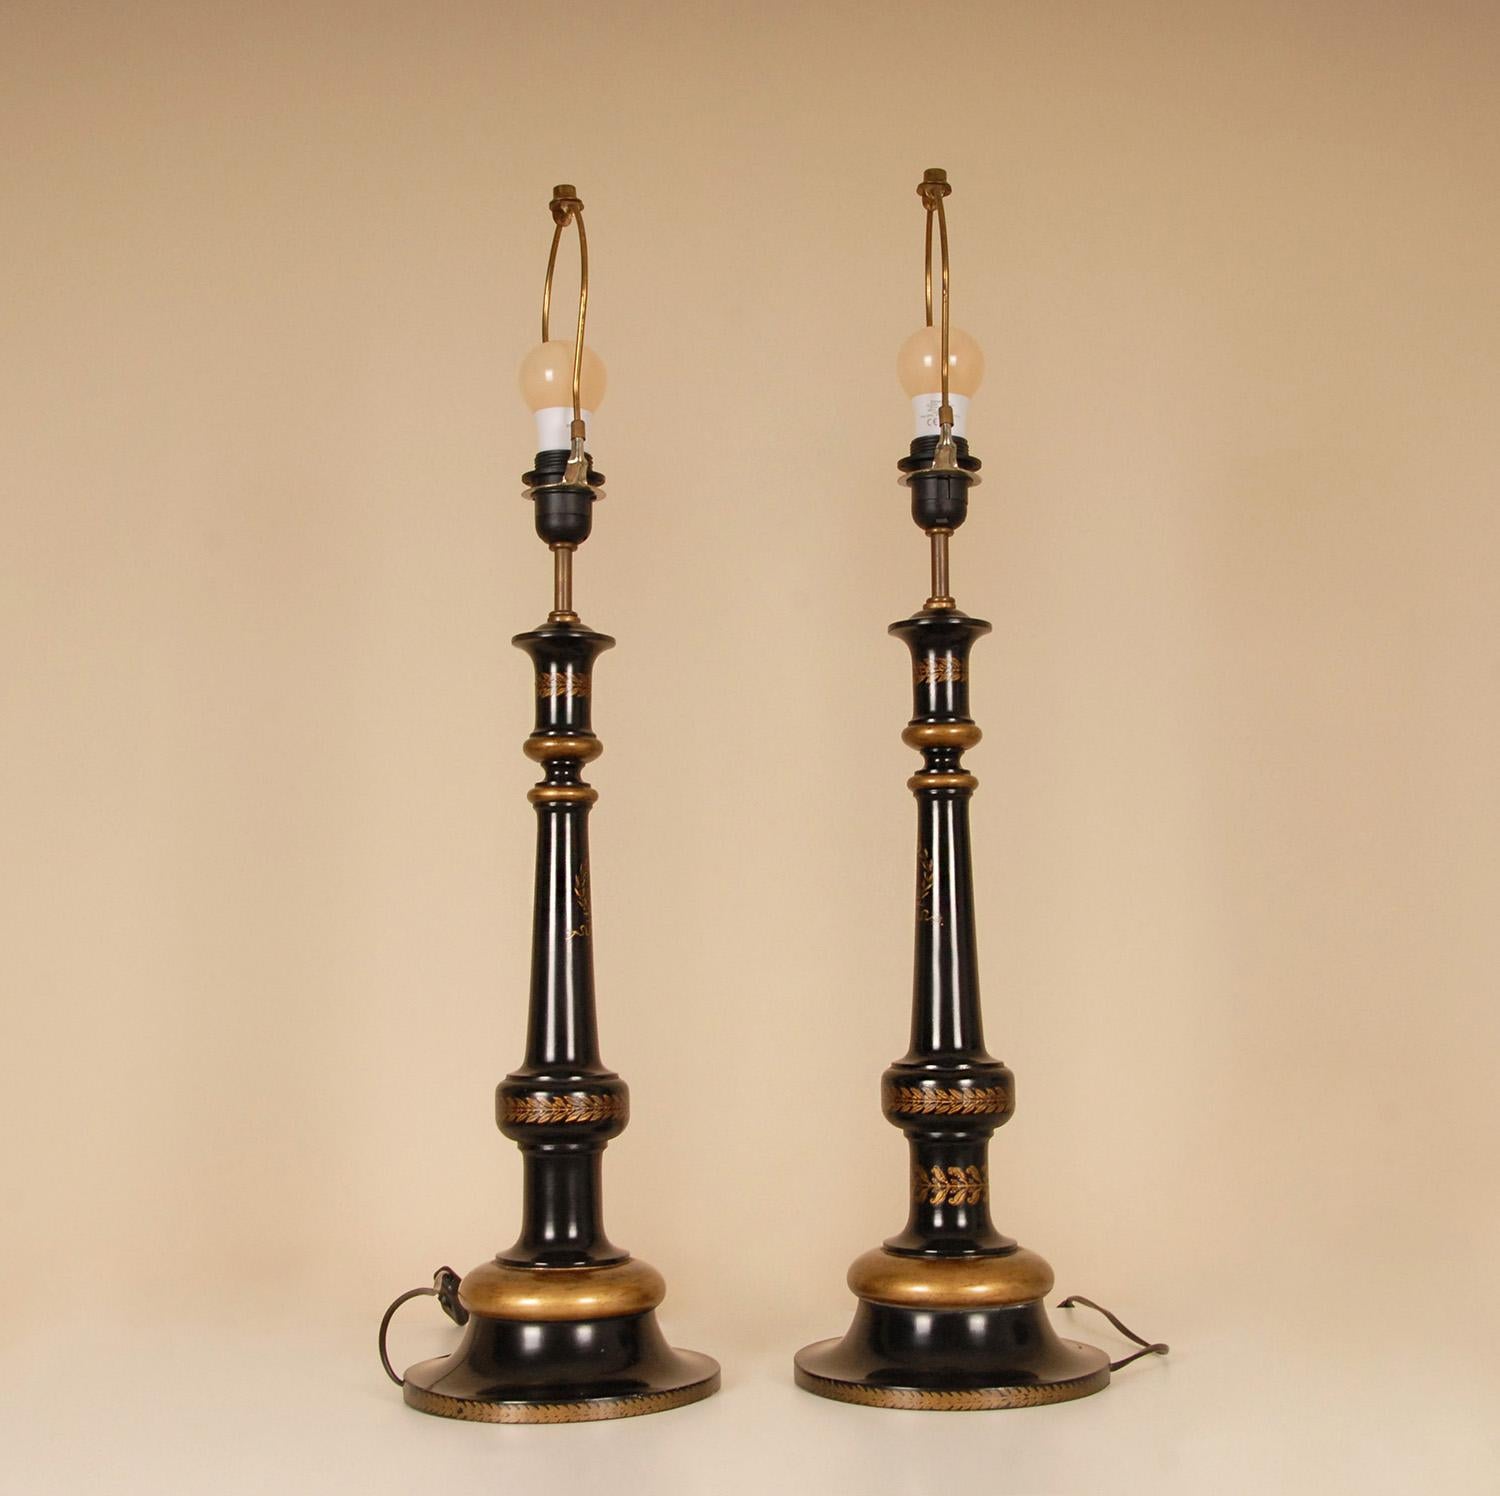 Faux Leather English Traditional Lamps Gold Black Ebonised wood High End Table Lamps For Sale